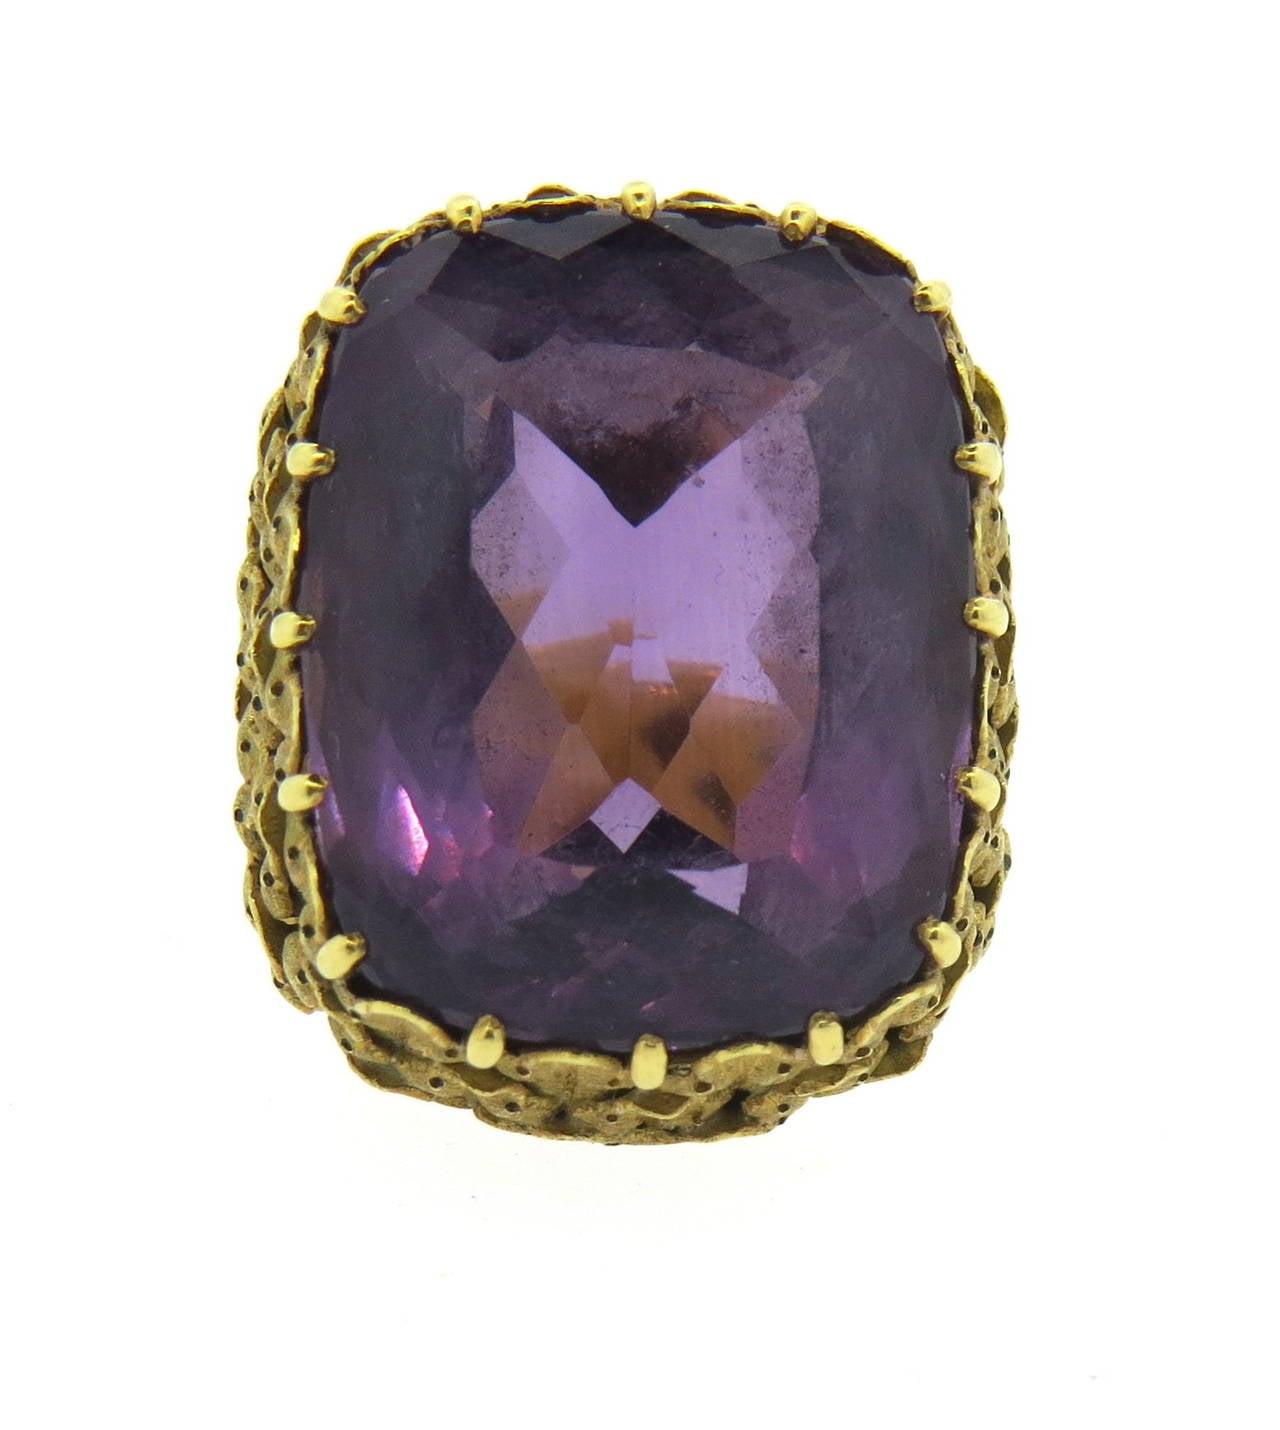 Circa 1960s ring, featuring approximately 27ct amethyst gemstone,set in beautifully hand engraved 18k gold setting. Ring size 5 1/2, ring top is 24mm x 20mm, ring sits approx. 11mm from the top of the finger. Weight of the piece - 22.4 grams